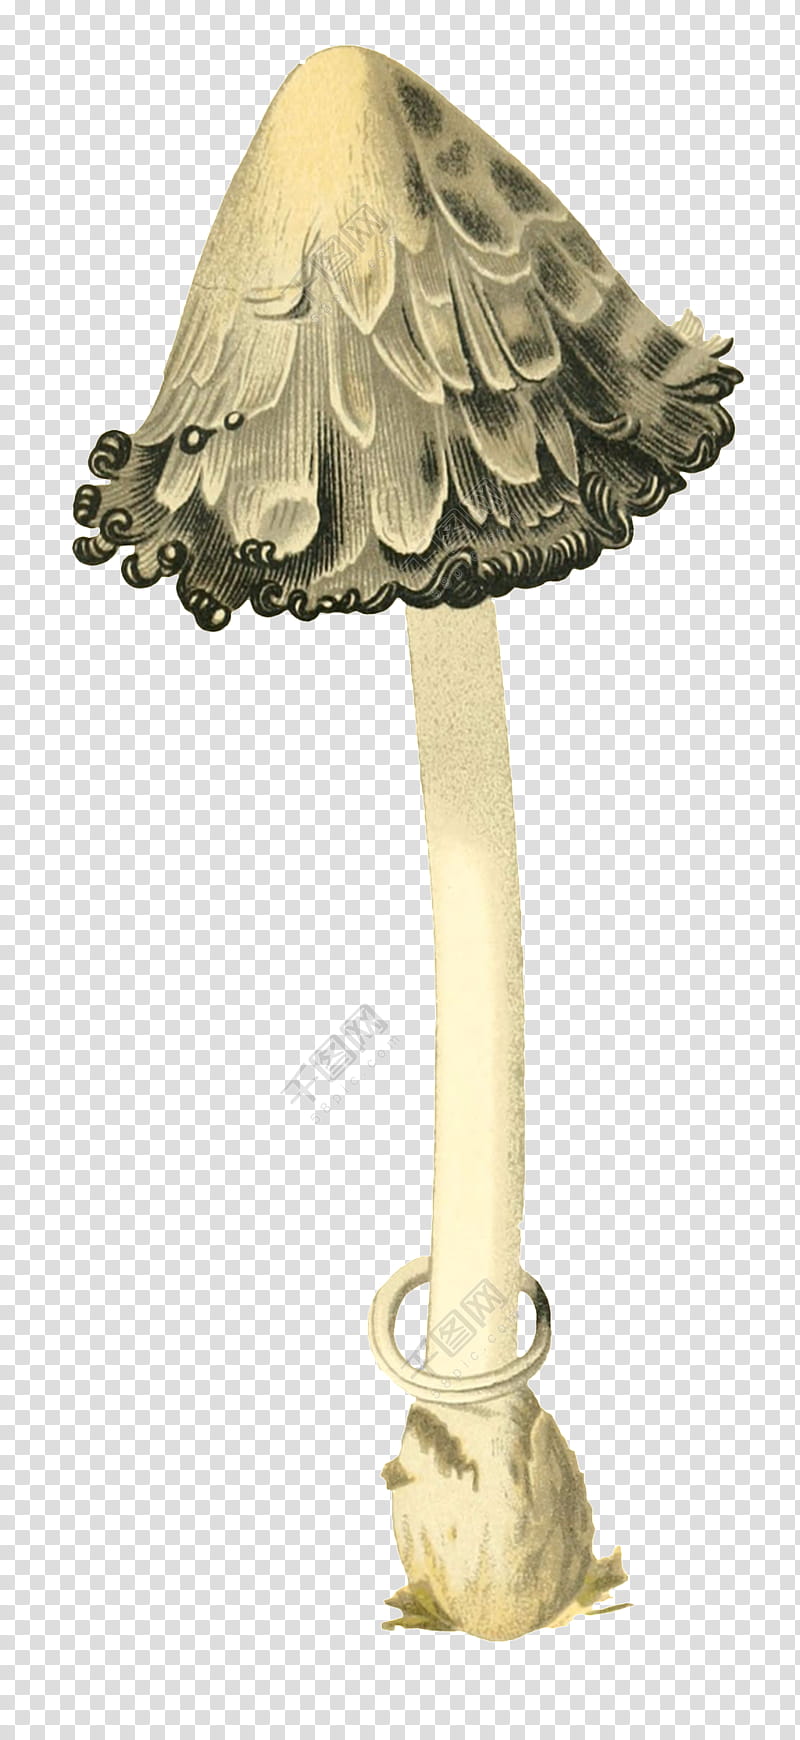 Watercolor Drawing, Mushroom, Shaggy Mane, Watercolor Painting, Lampshade, Lighting Accessory, Light Fixture, Brass transparent background PNG clipart